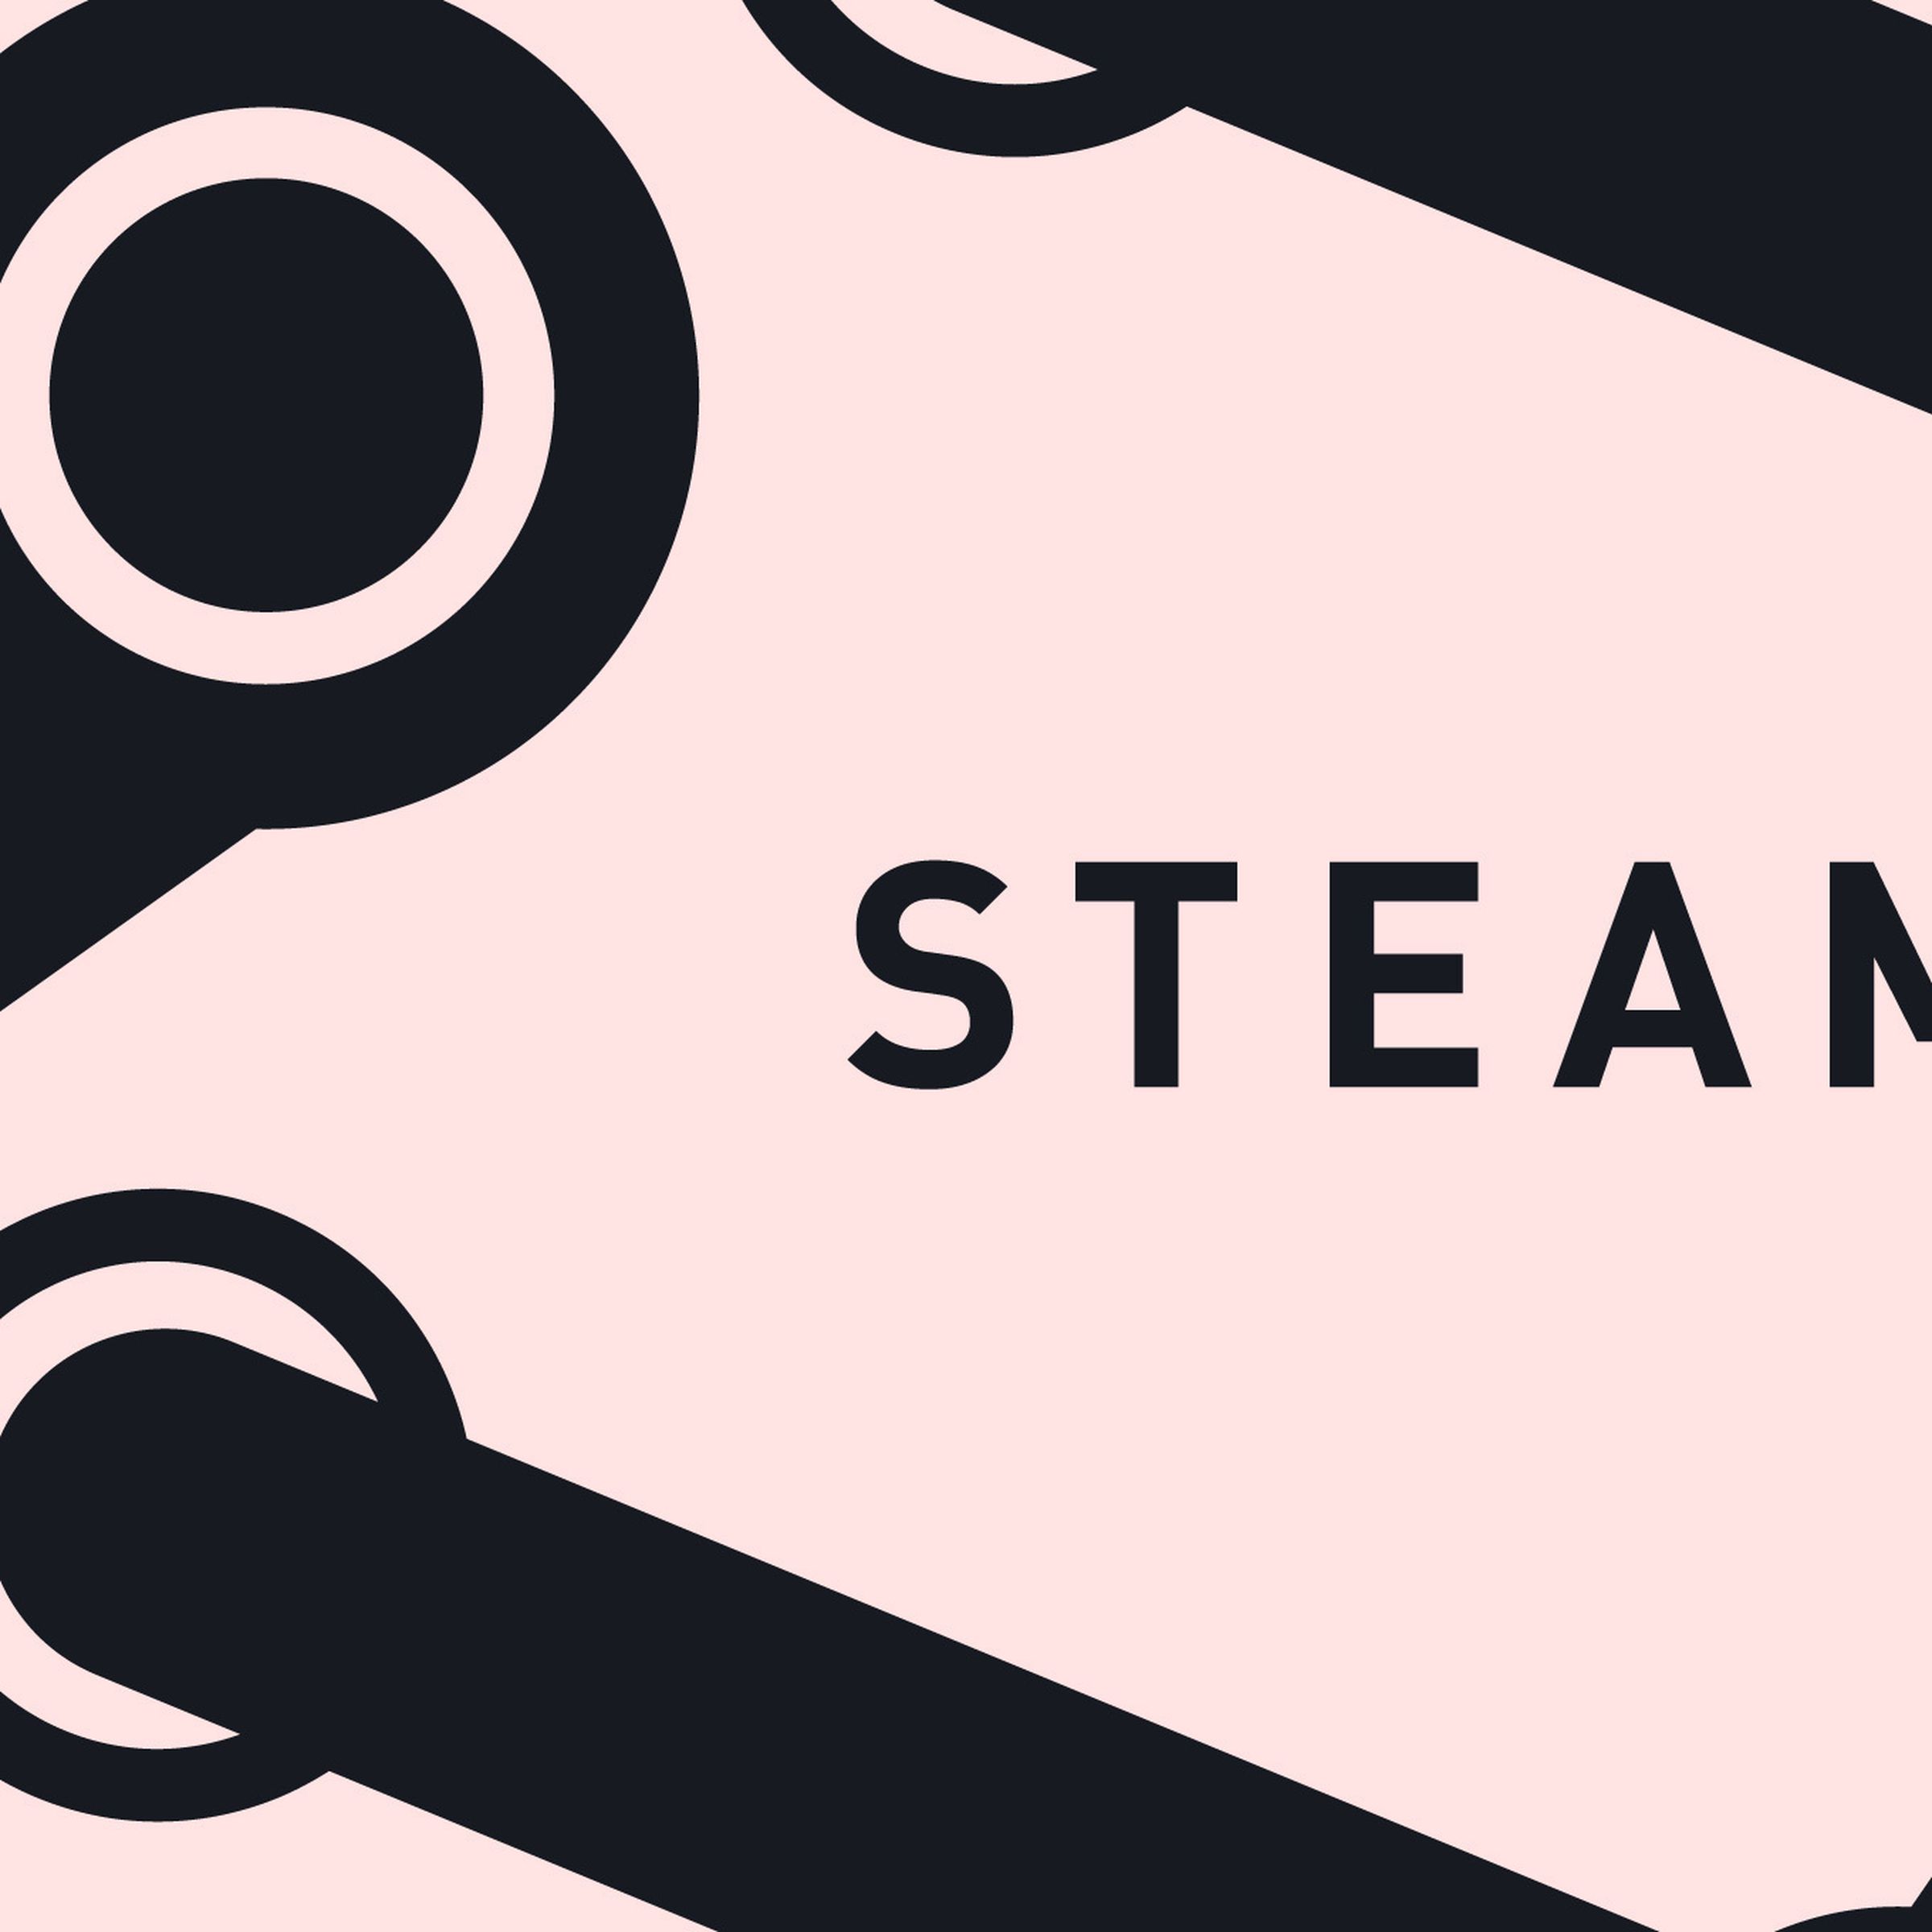 The Steam logo on a pink background, surrounded by Valve logos.